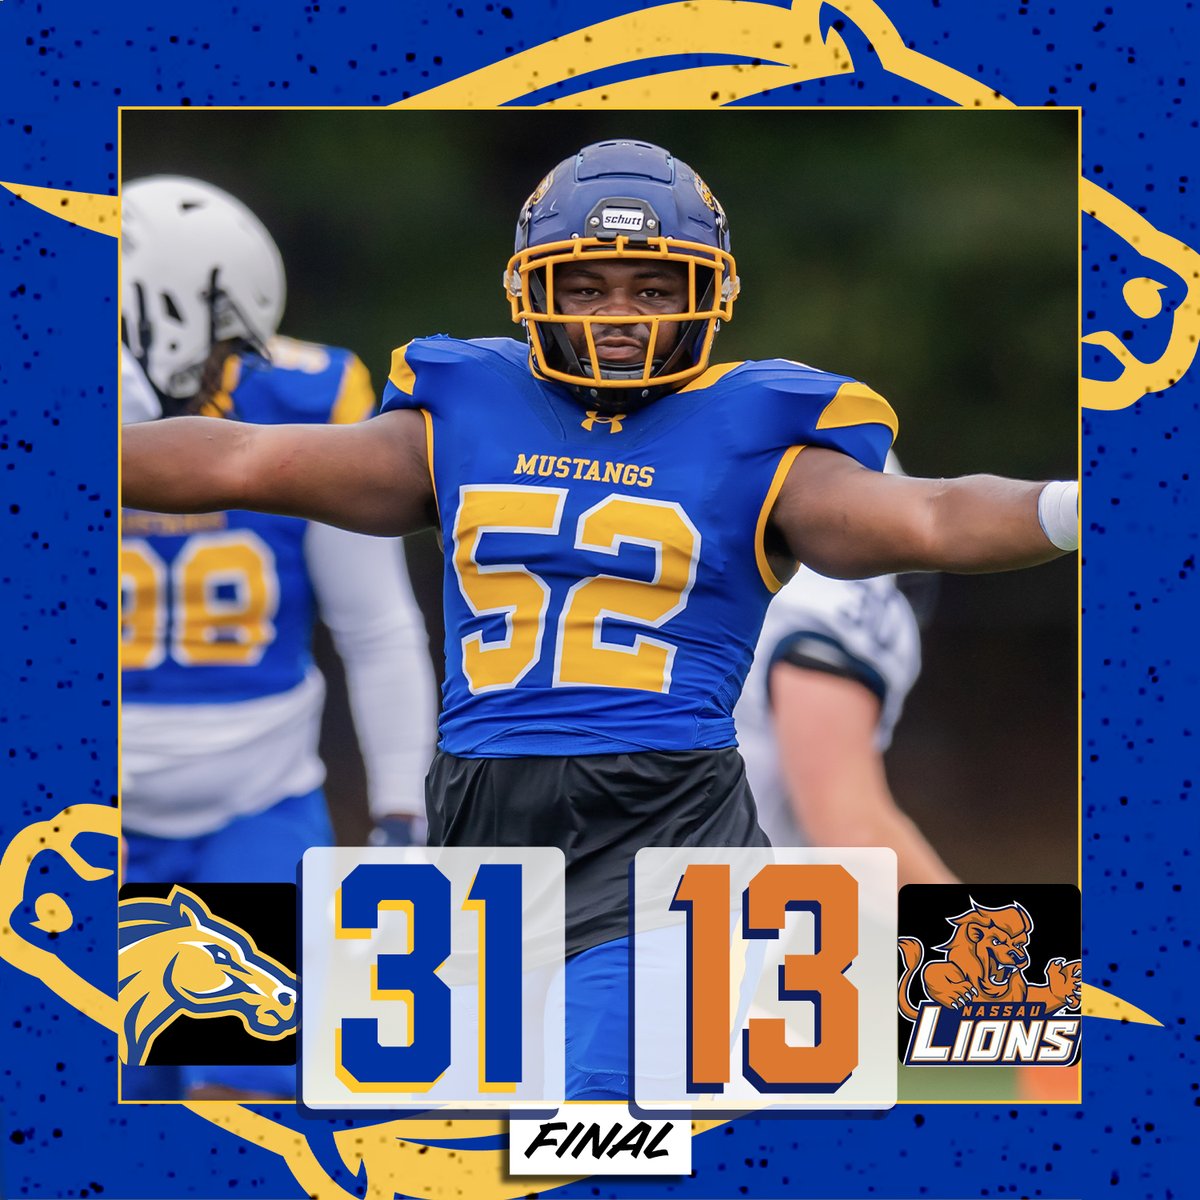 𝙏𝙝𝙖𝙩 1️⃣-0️⃣ 𝙛𝙚𝙚𝙡𝙞𝙣𝙜! The @mjcmustangs take a quick lead and never look back in a 31-13 season-opening victory at D3 #5 Nassau! Boothe throws a pair of TDs, McDuffie and Alia each rush one in, and the defense gets the job done! #GoHereGrowHere @NJCAAFootball